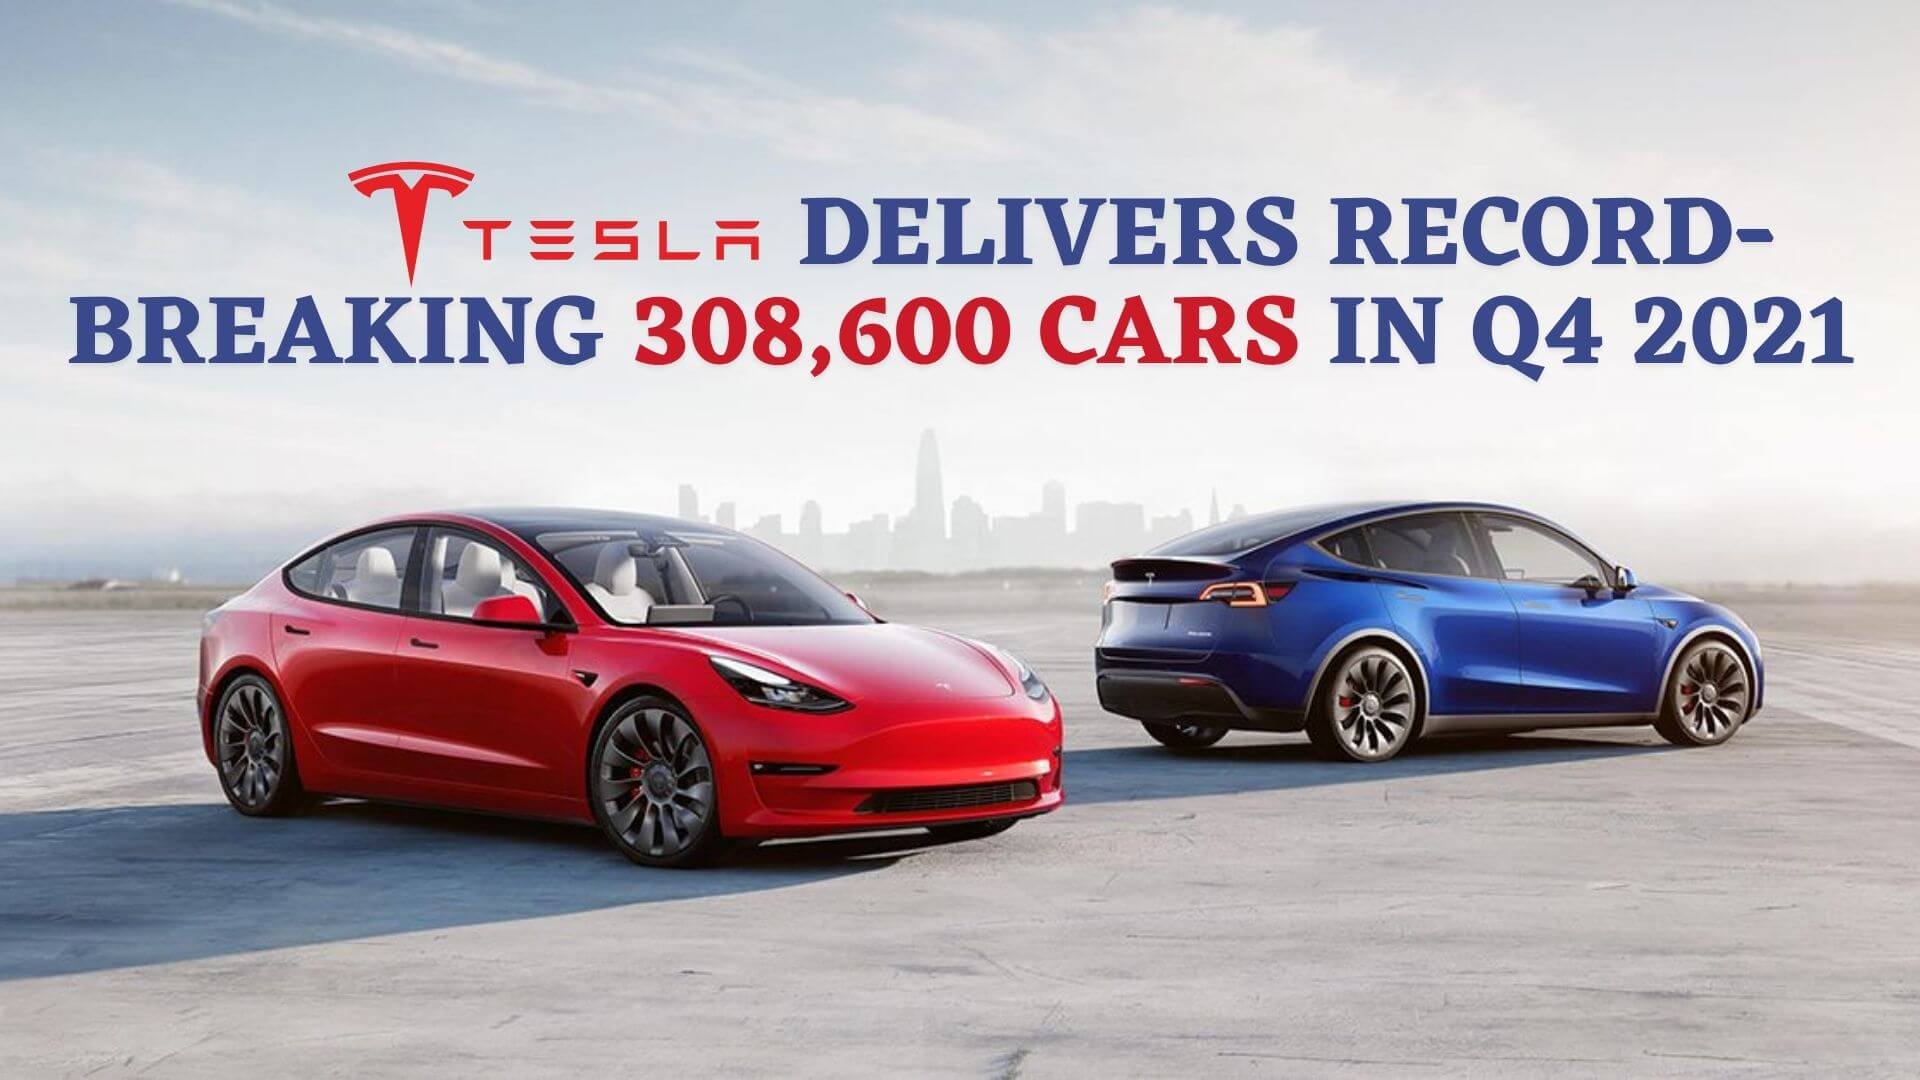 https://e-vehicleinfo.com/tesla-delivers-record-breaking-308000-cars-in-q4-2021/